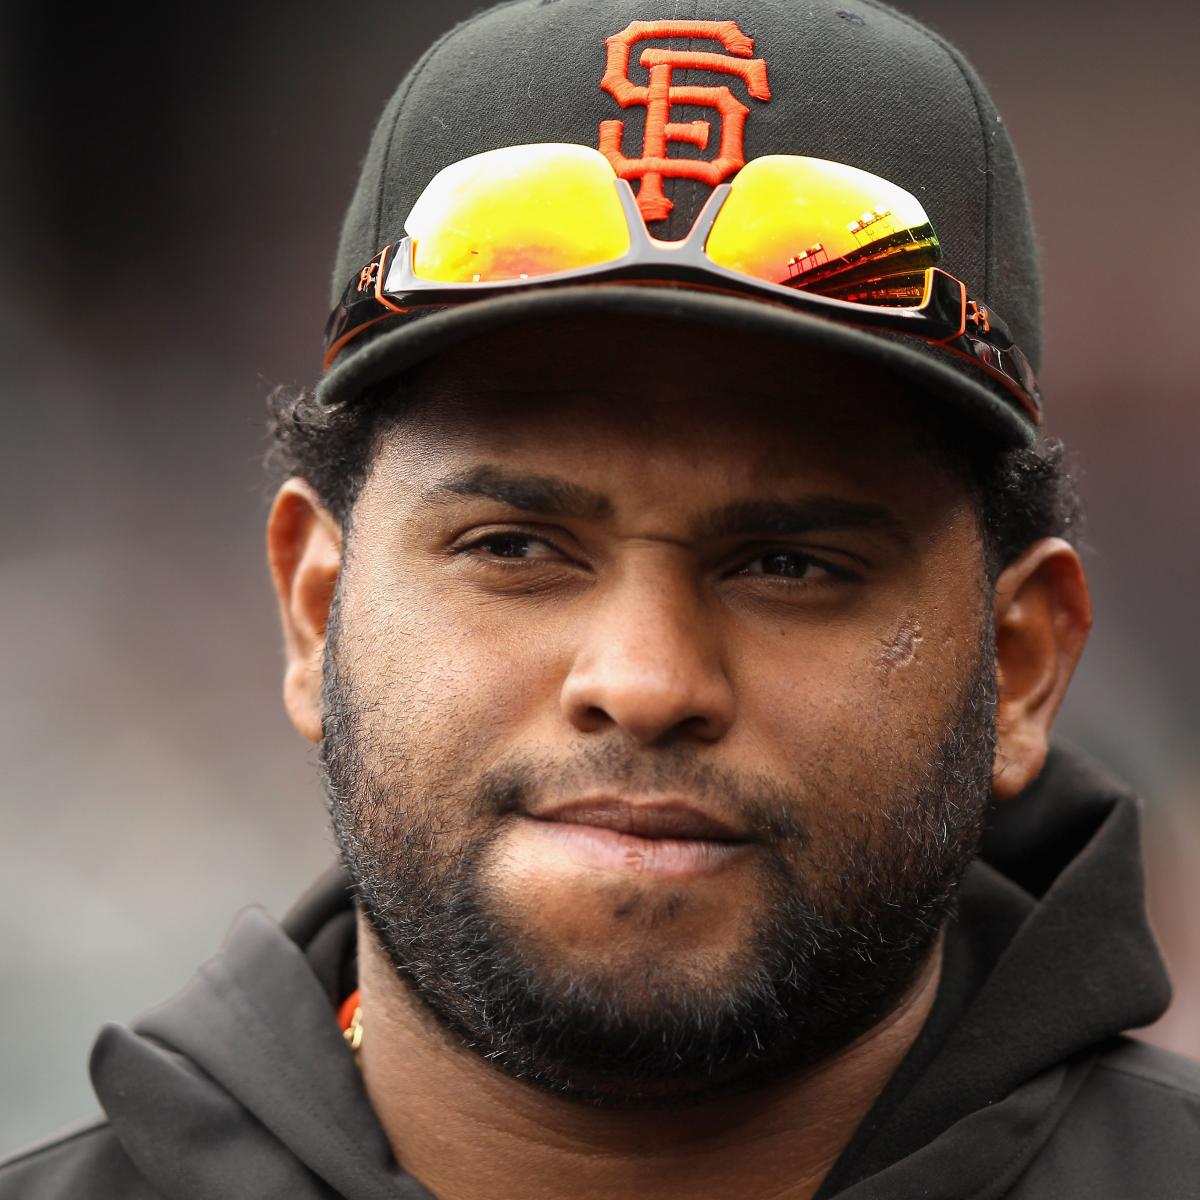 Pablo Sandoval Reportedly Being Investigated over Alleged Sexual